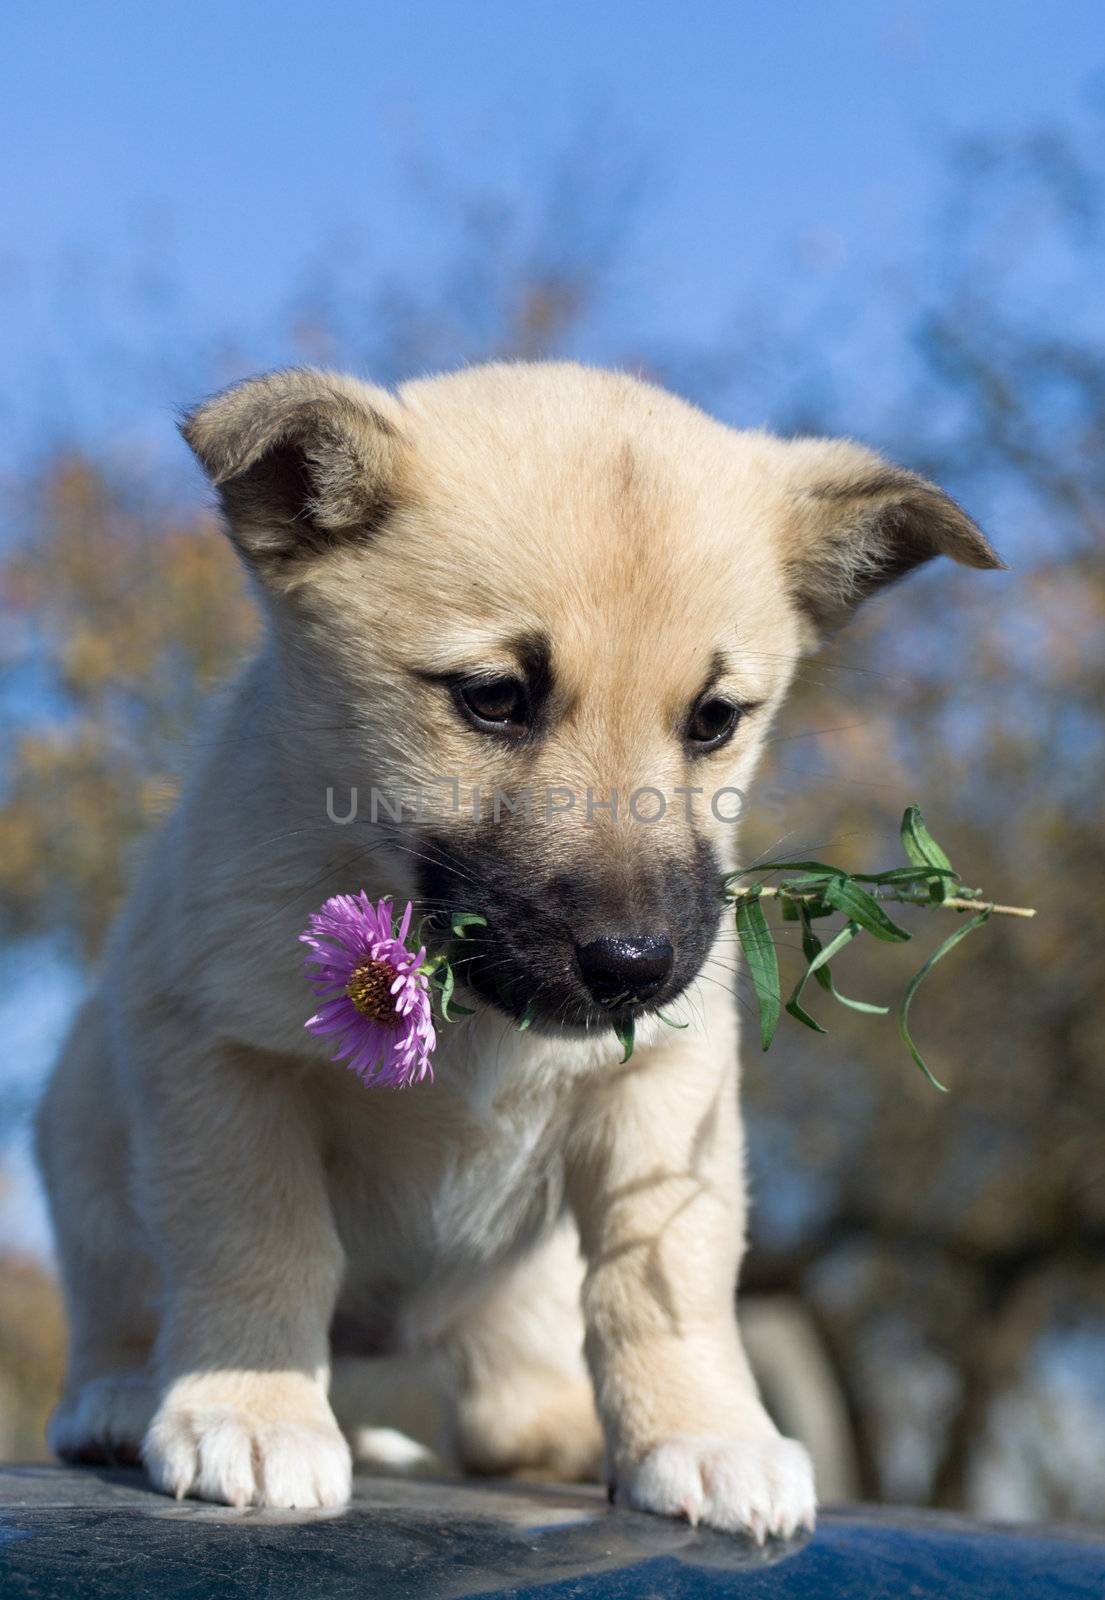 puppy dog hold flowers in mouth on blue sky background